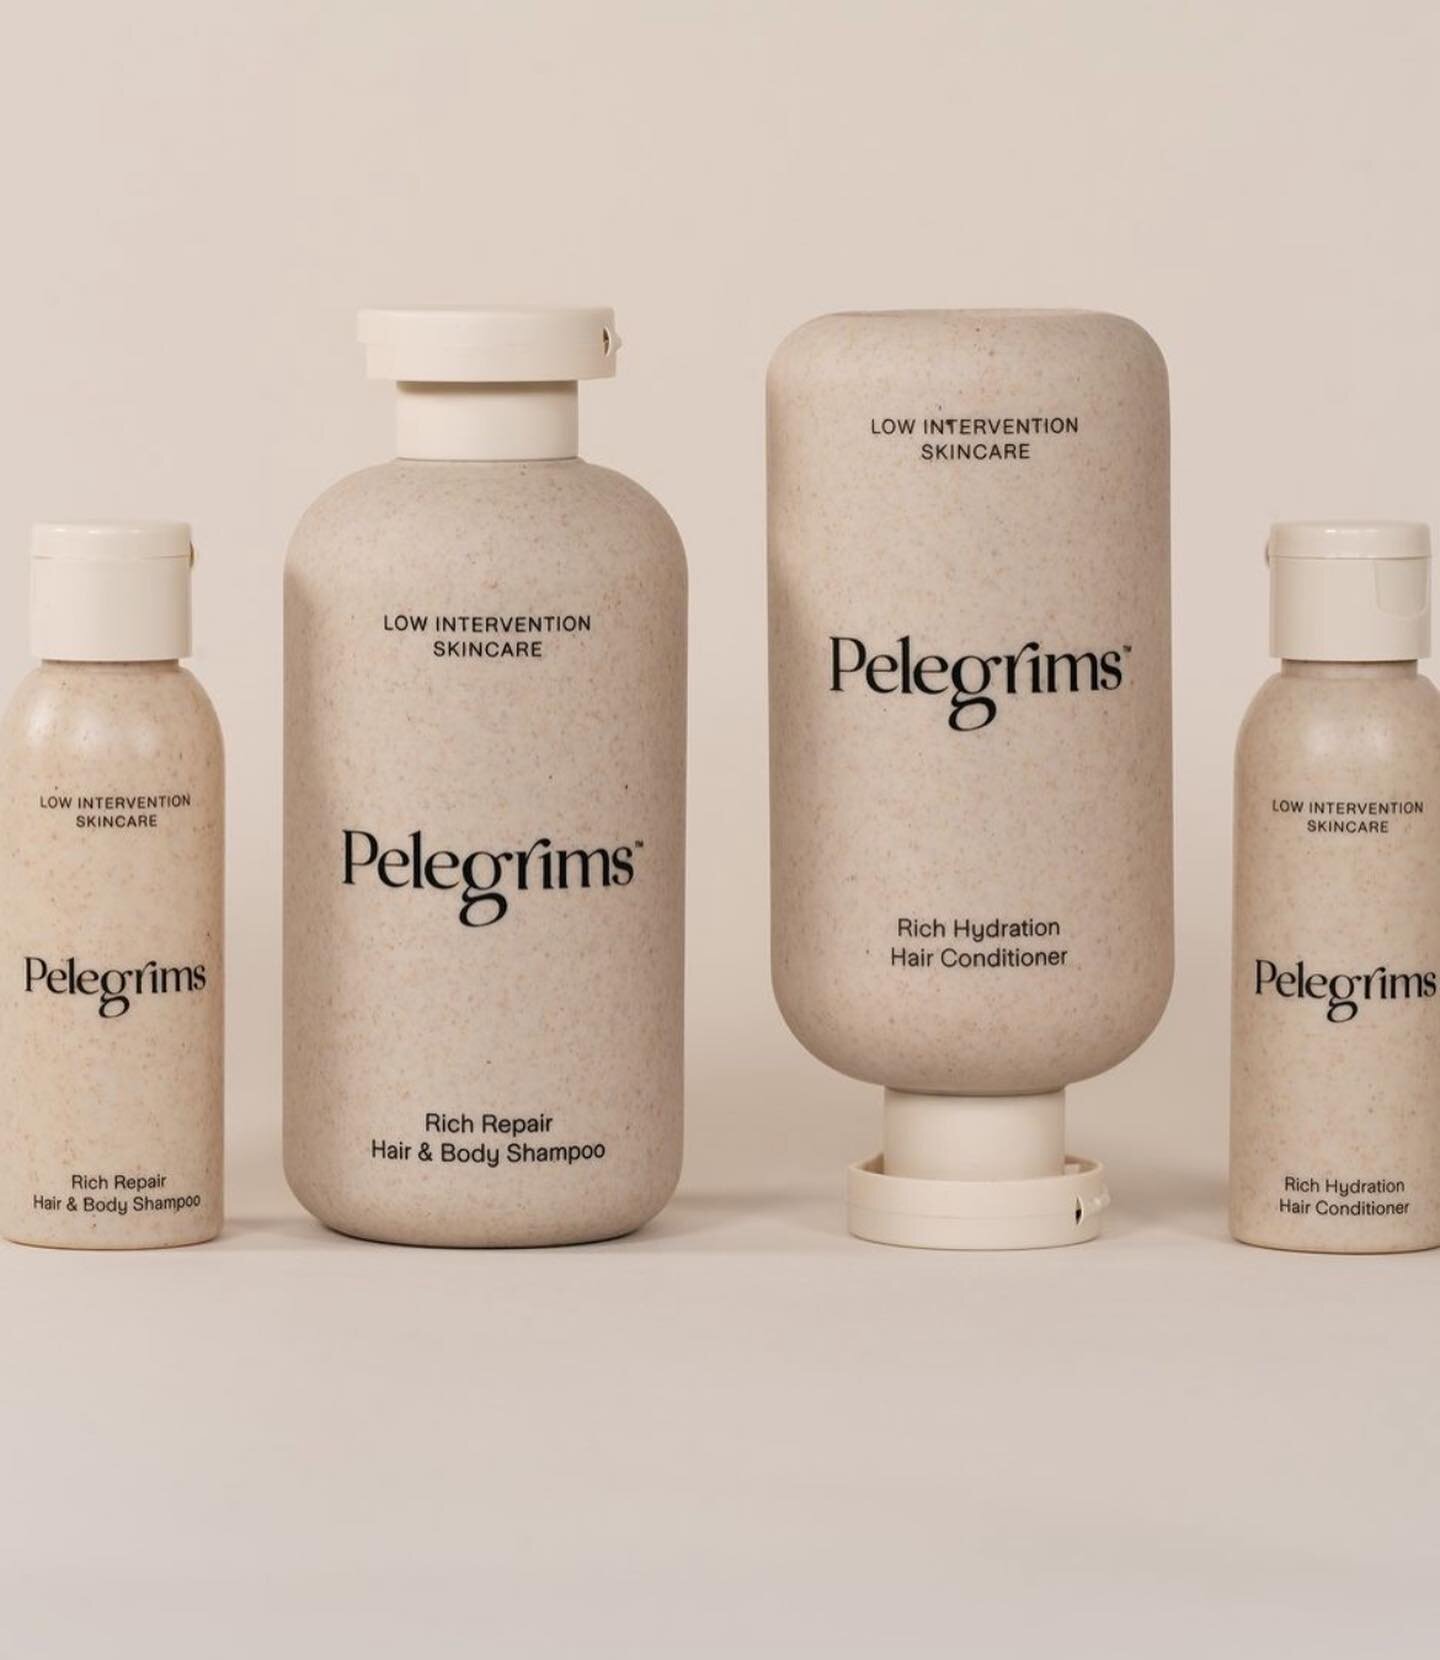 Part of the amazing Pelegrims range // An everyday cleansing shampoo infused with 1% Wild nettle extract, Kentish apple cider vinegar and Pinot noir grape extract. Provides intense cleansing to remove product and dirt build up around the follicle whi